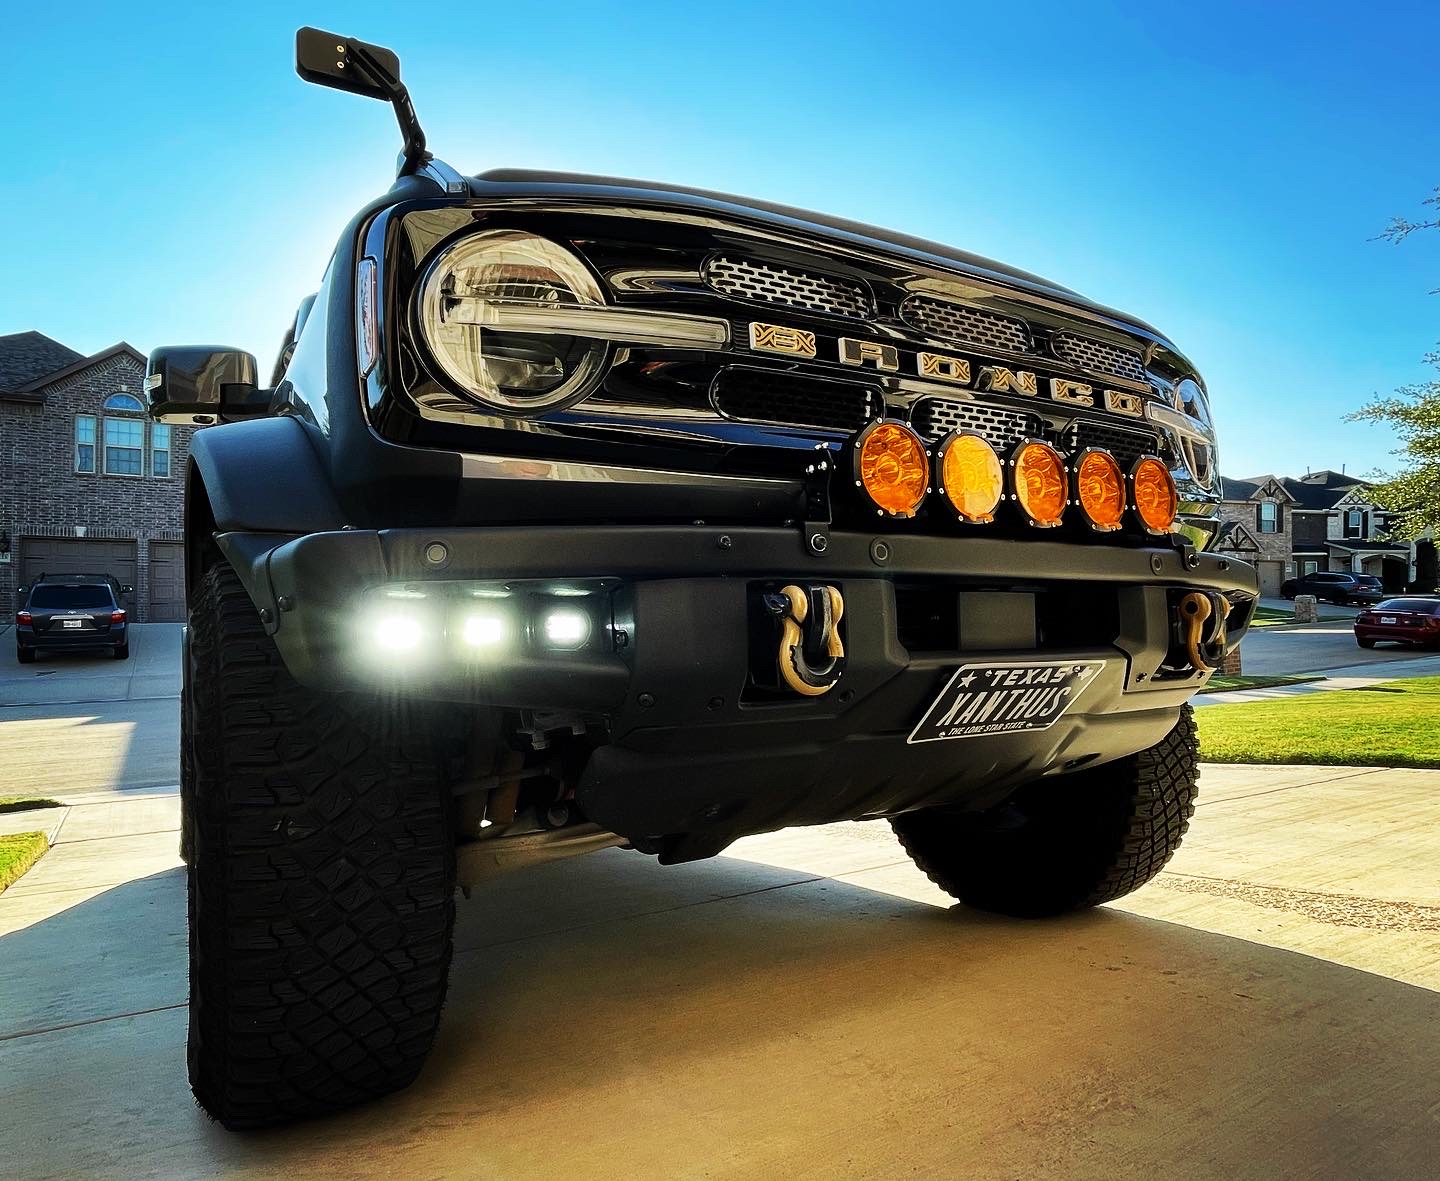 Ford Bronco What Do You Use Your Trail Sights For? 486CC74A-FC18-4FDD-9ACB-0512A14FCA7F